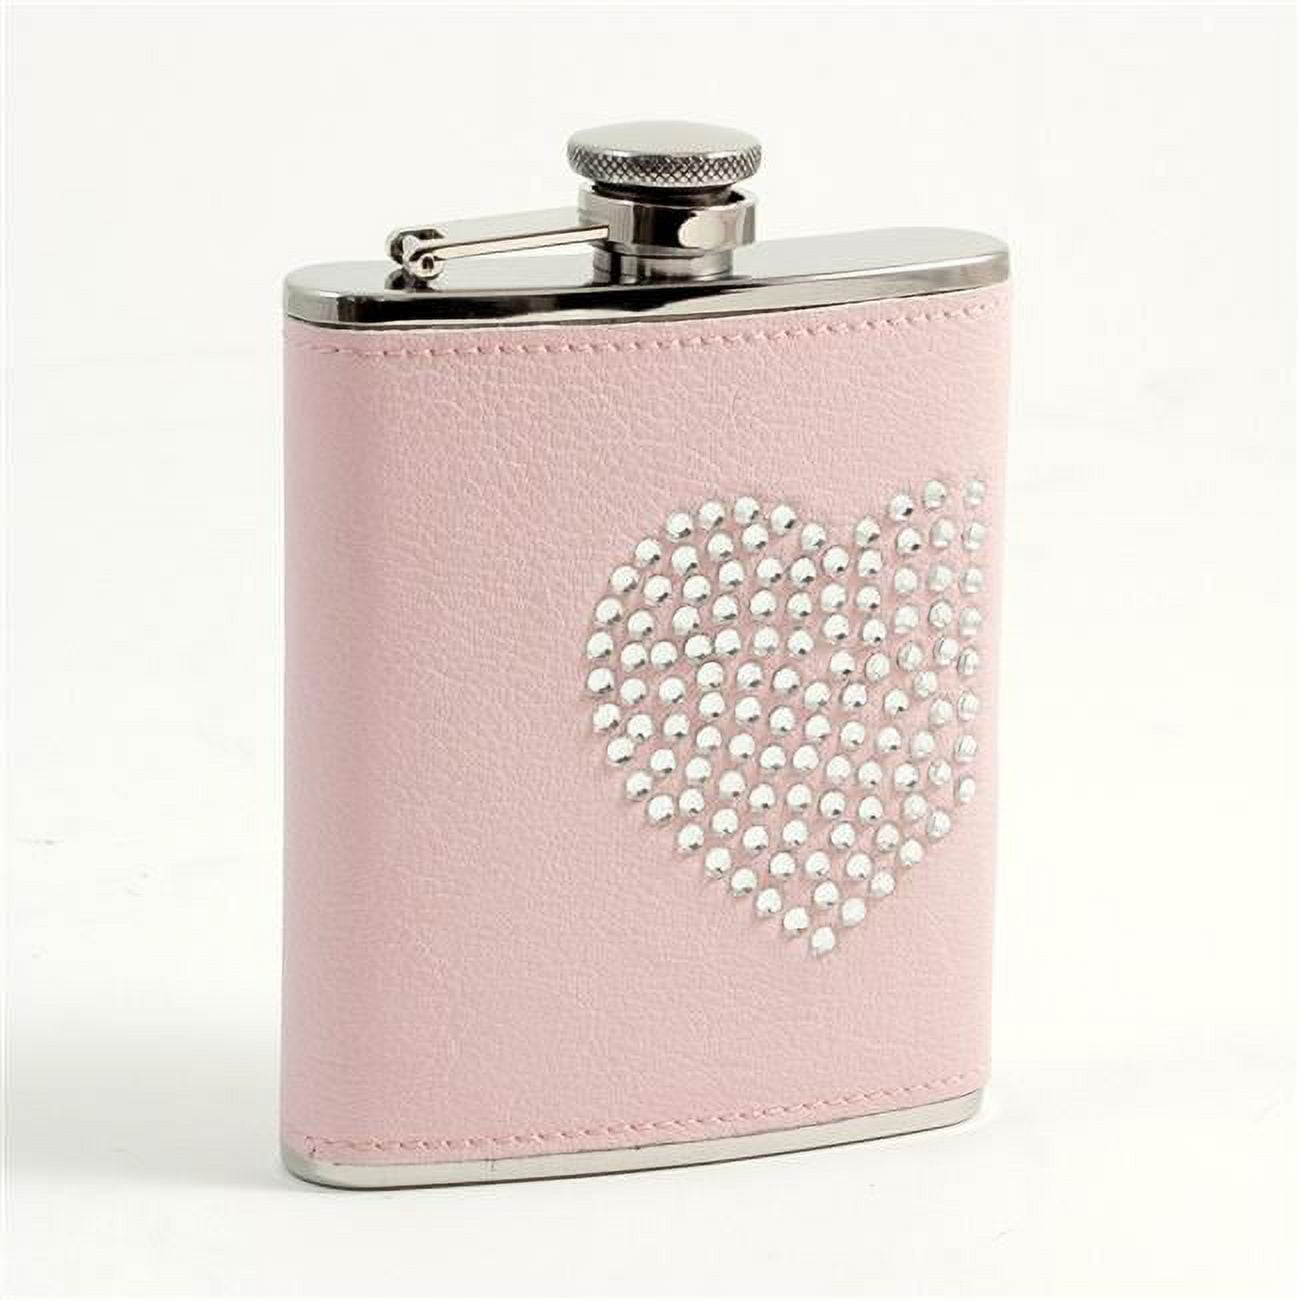 Bey-berk International 6 Oz Stainless Steel Leatherette Flask With Reign Stone Heart Design Captive Cap & Durable Rubber Seal - Pink & Silver